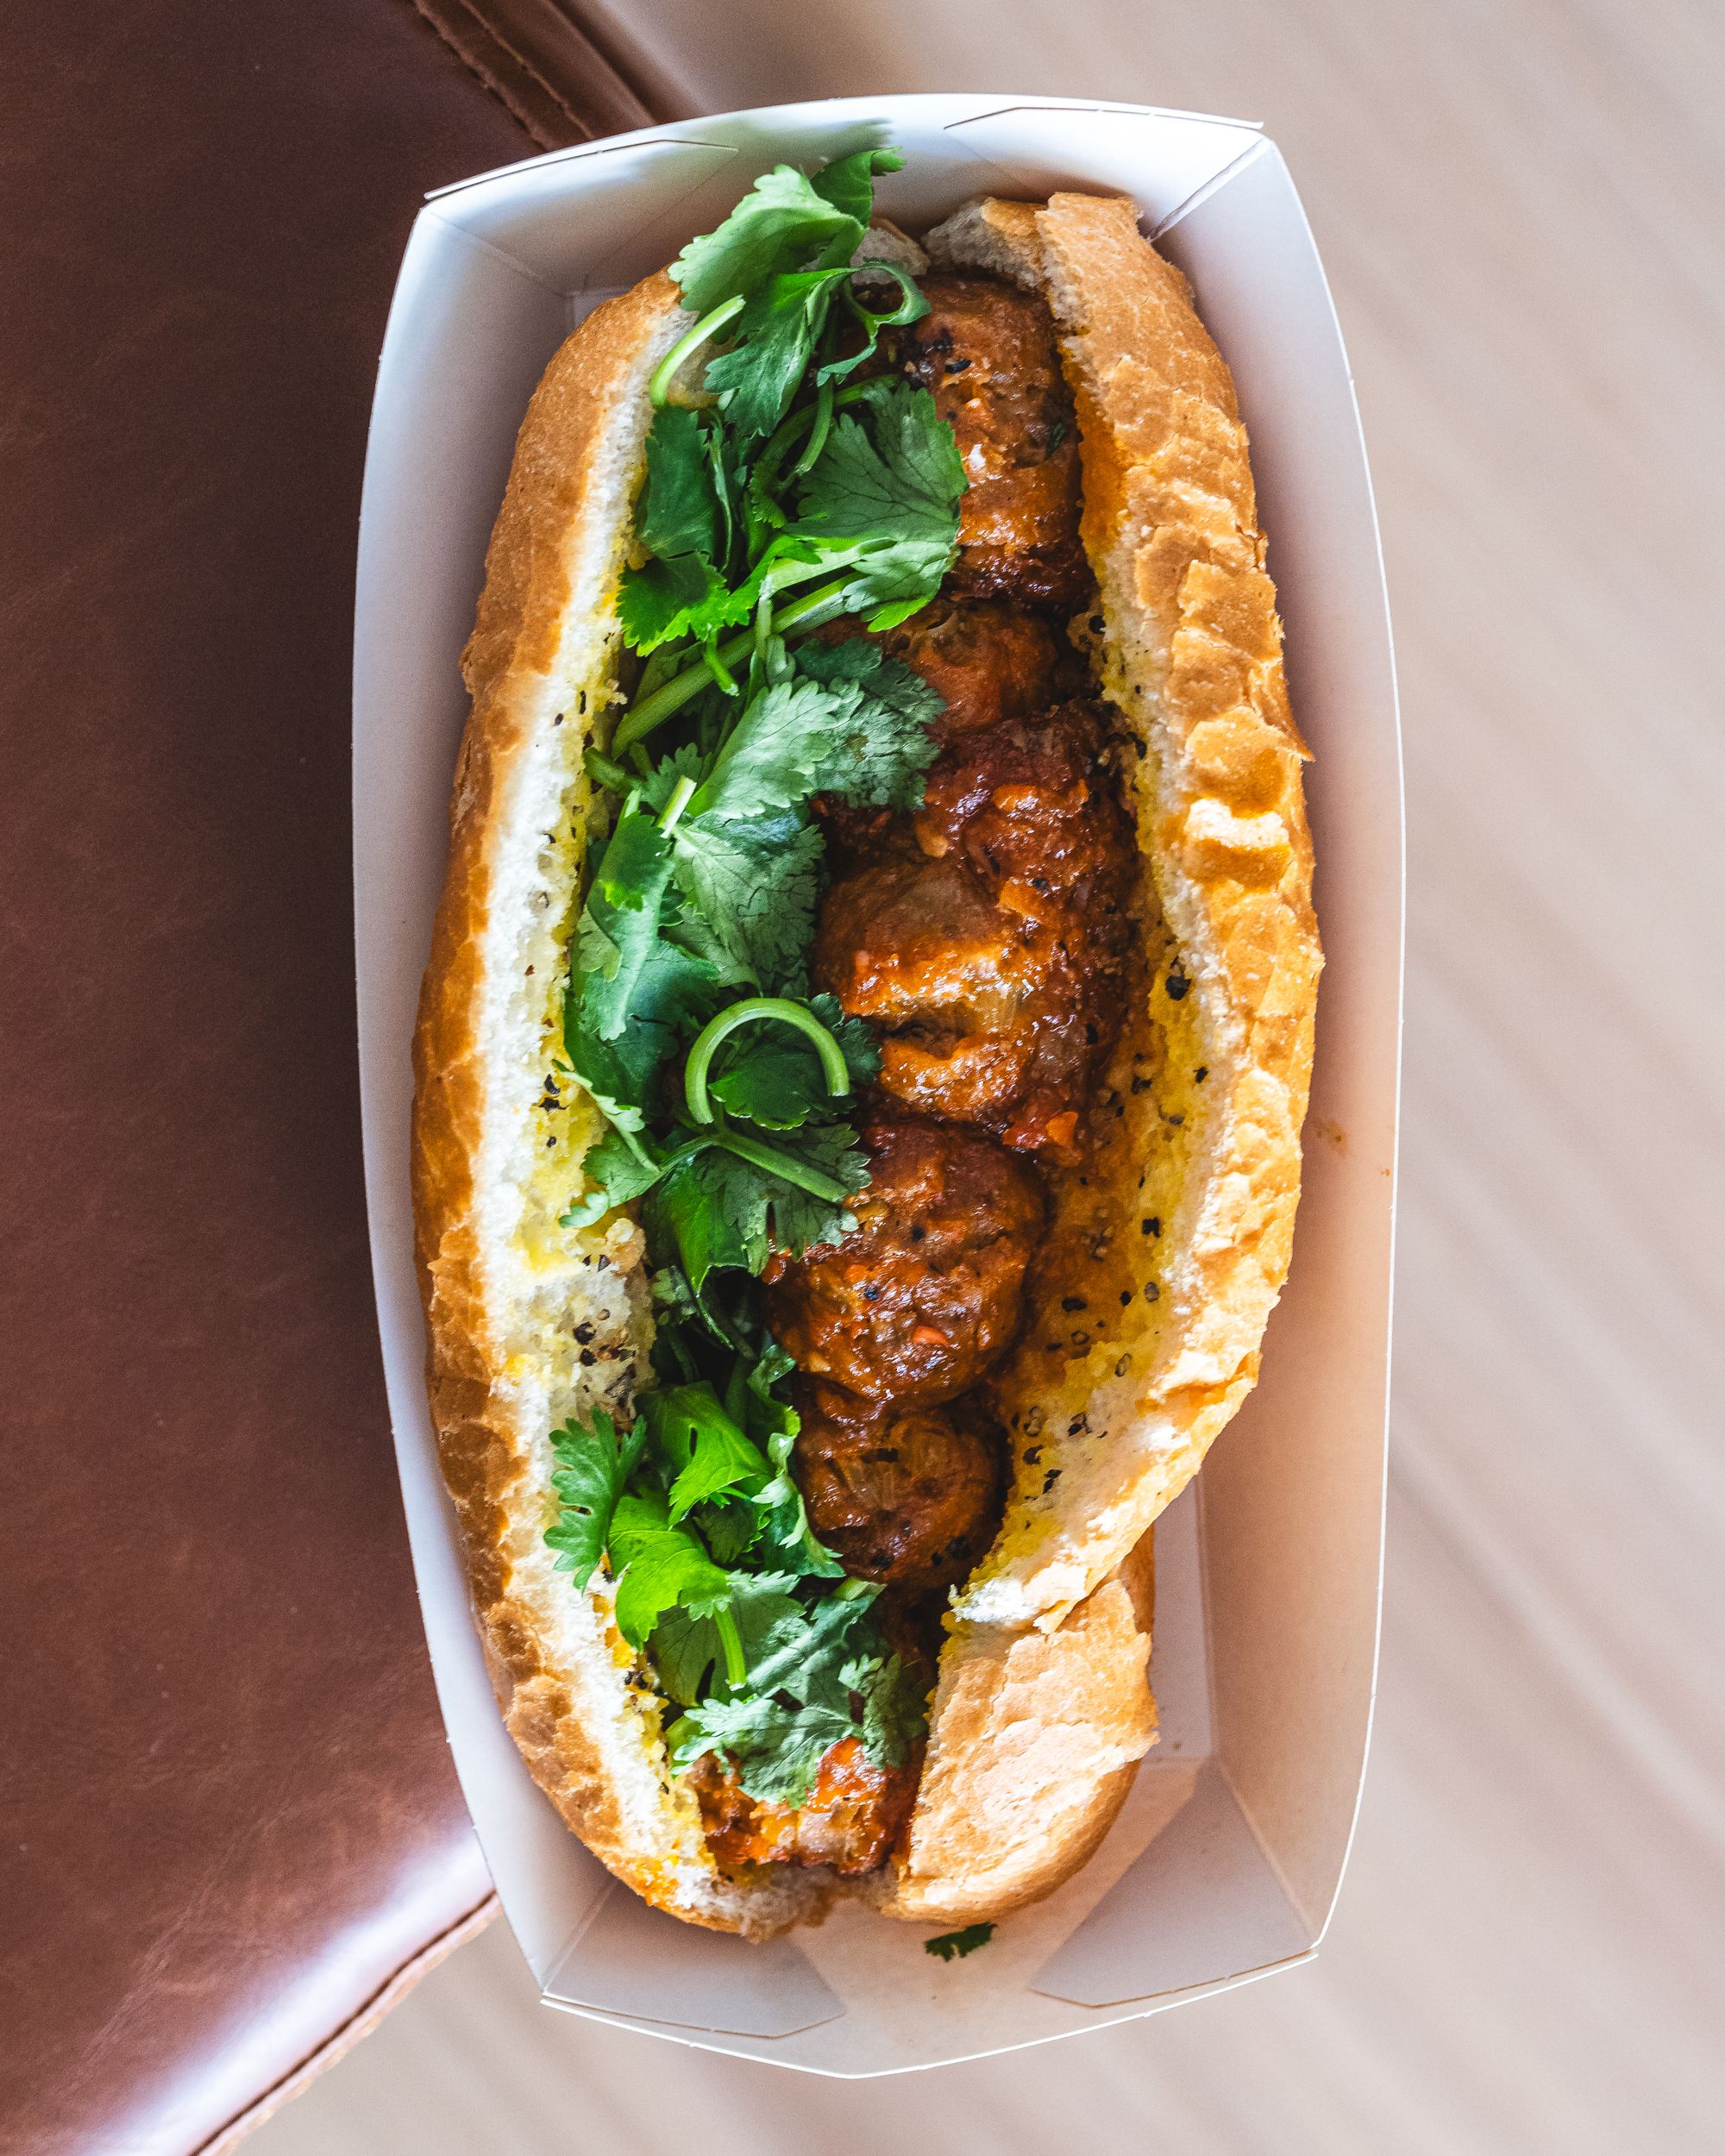 Top down of banh mi with meatballs